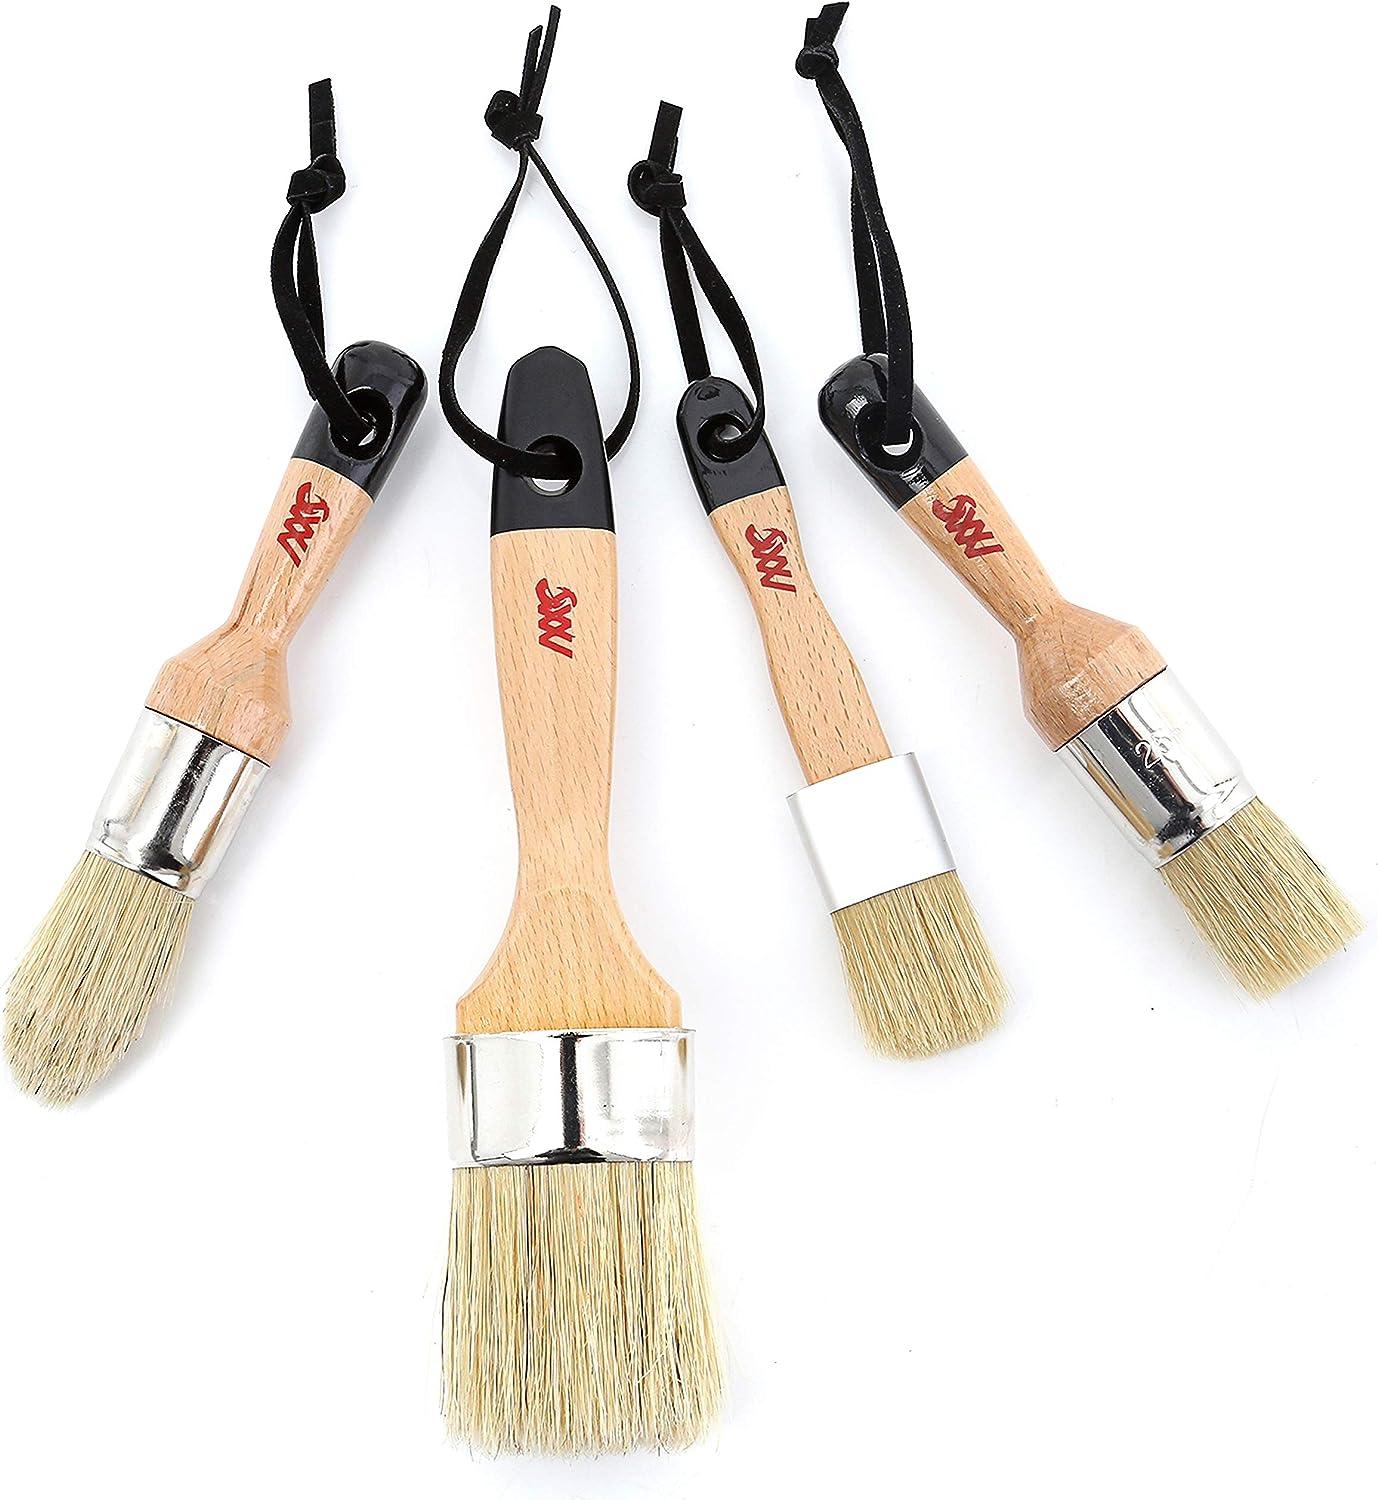 Chalk Wax Paint Brush 4PCs Set Including 3 Small Paint Brushes for  Furniture Painting and 1 Large Chalk Brush Bristle Paint Brushes Set  Compatible with Annie Sloan Chalk Paint Fusion Mineral Paint